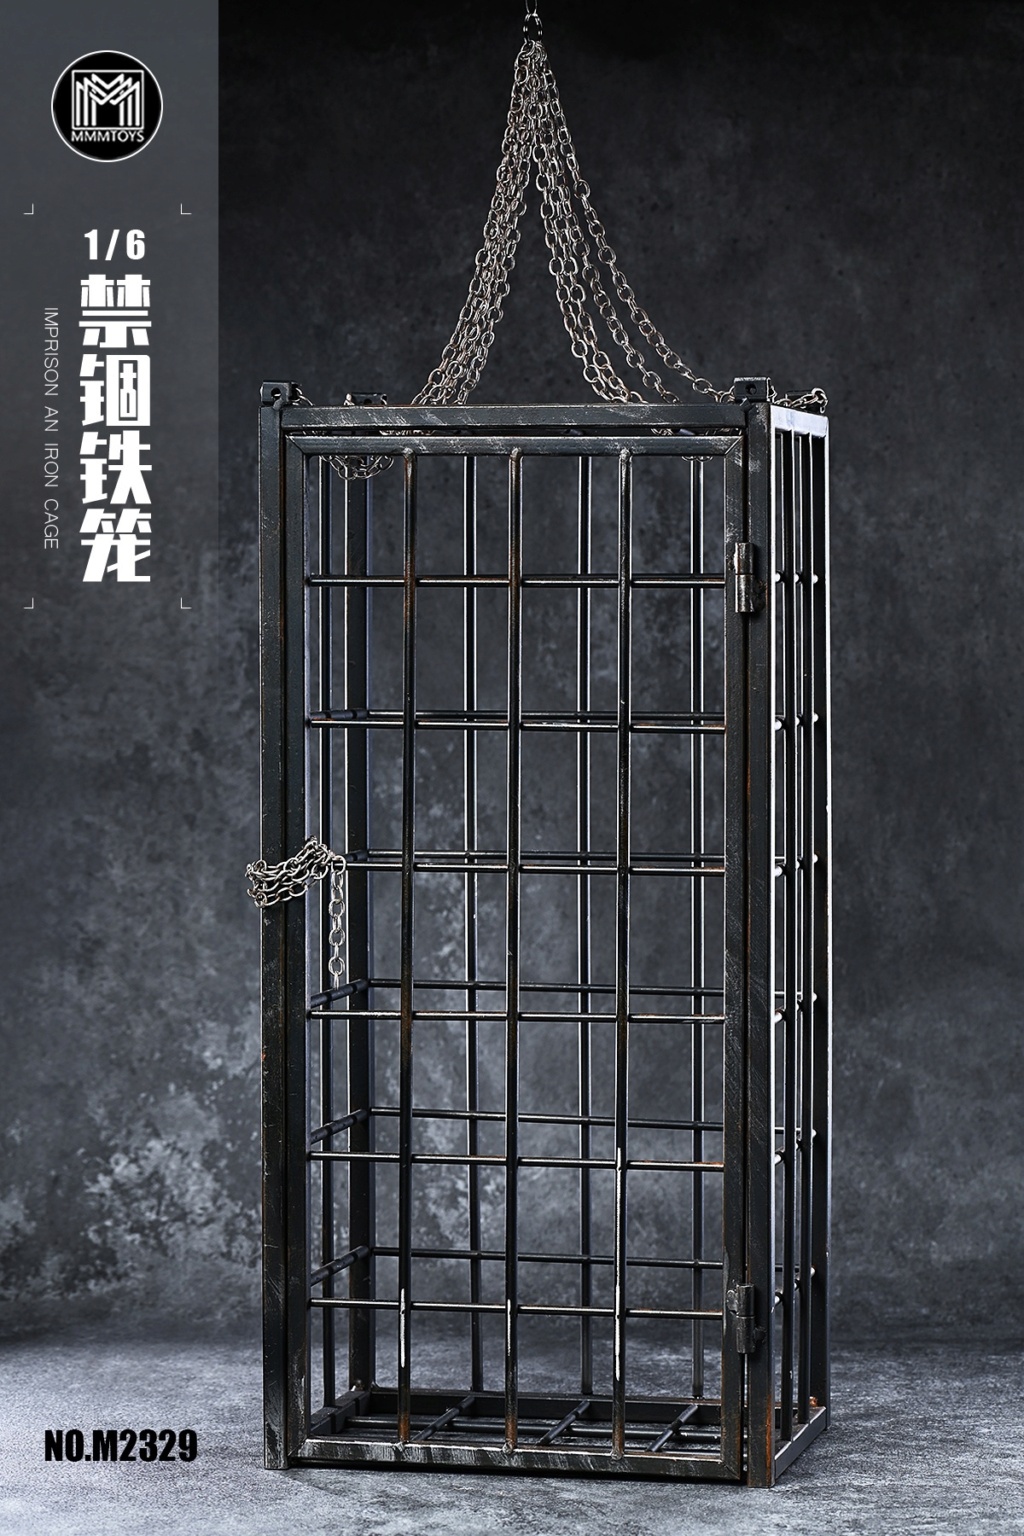 Imprisoned - NEW PRODUCT: MMMToys: 1/6 Imprisoned iron cage M2329  15304412